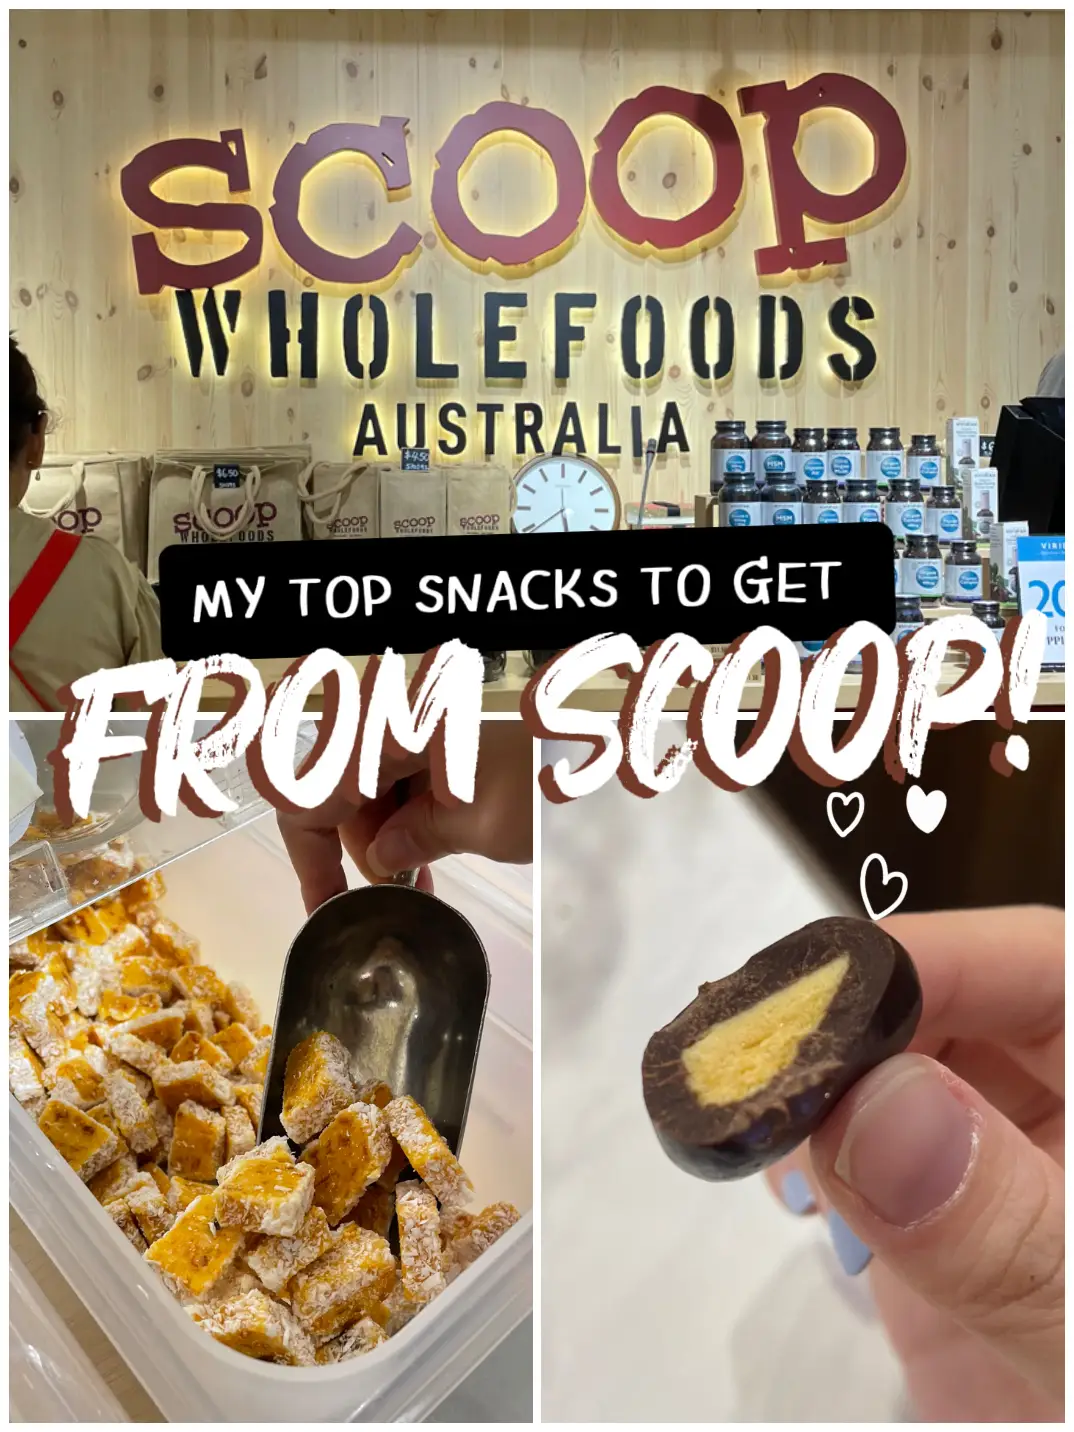 MY TOP SNACKS TO GET FROM SCOOP! 😋 's images(0)